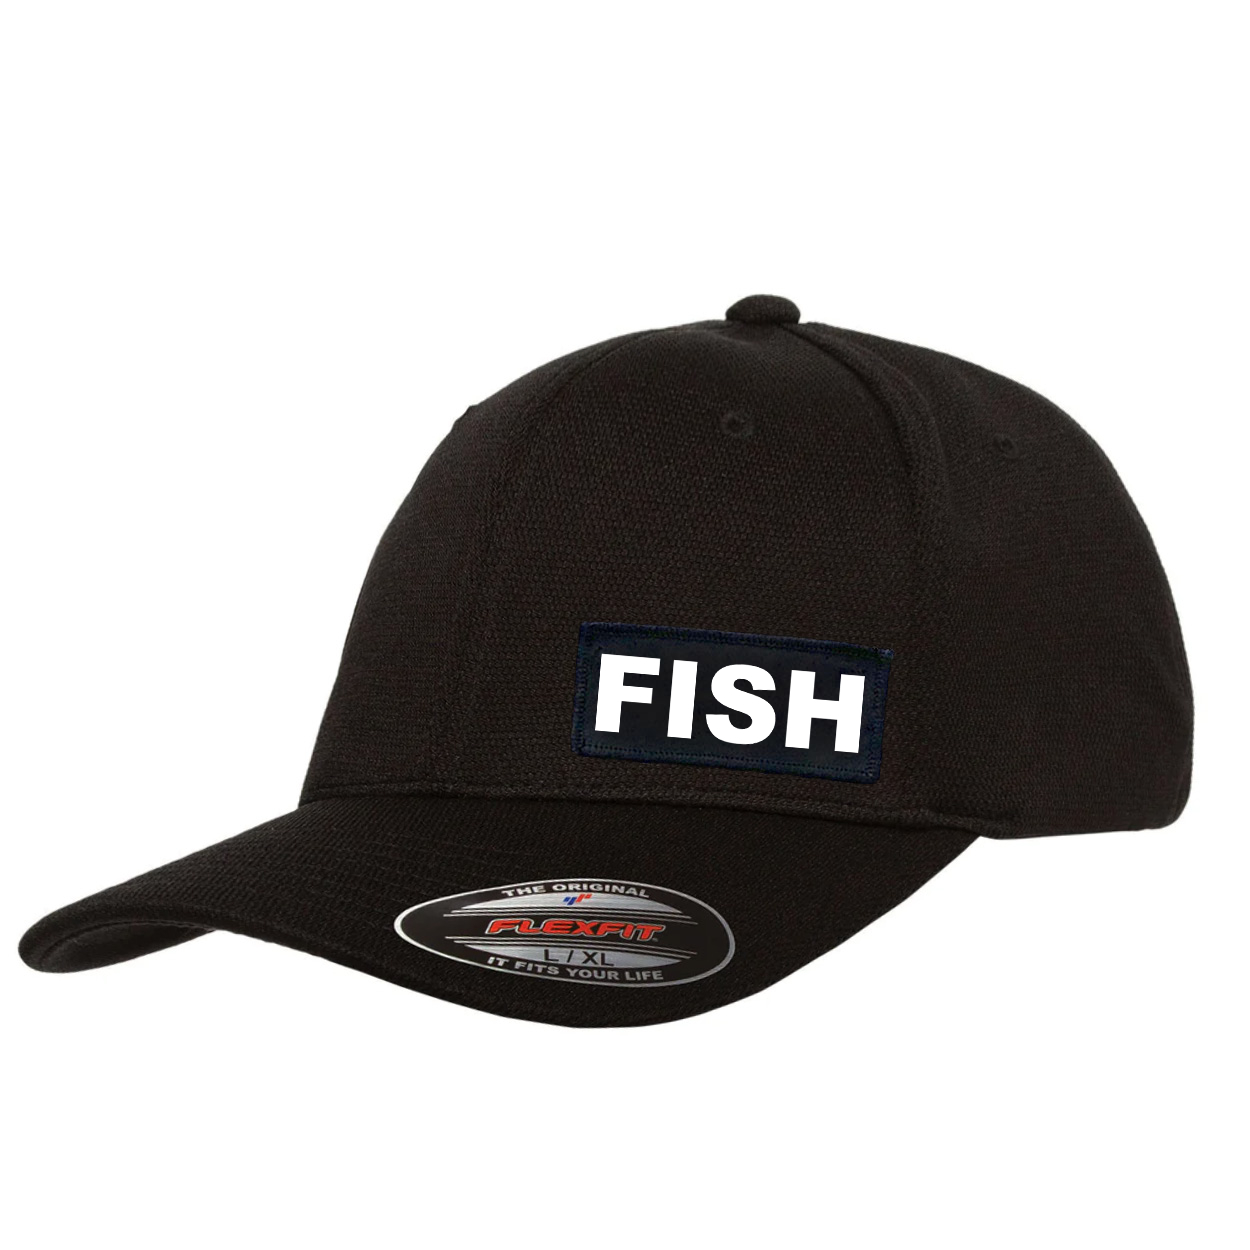 Fish Brand Logo Night Out Woven Patch Flex-Fit Hat Black 